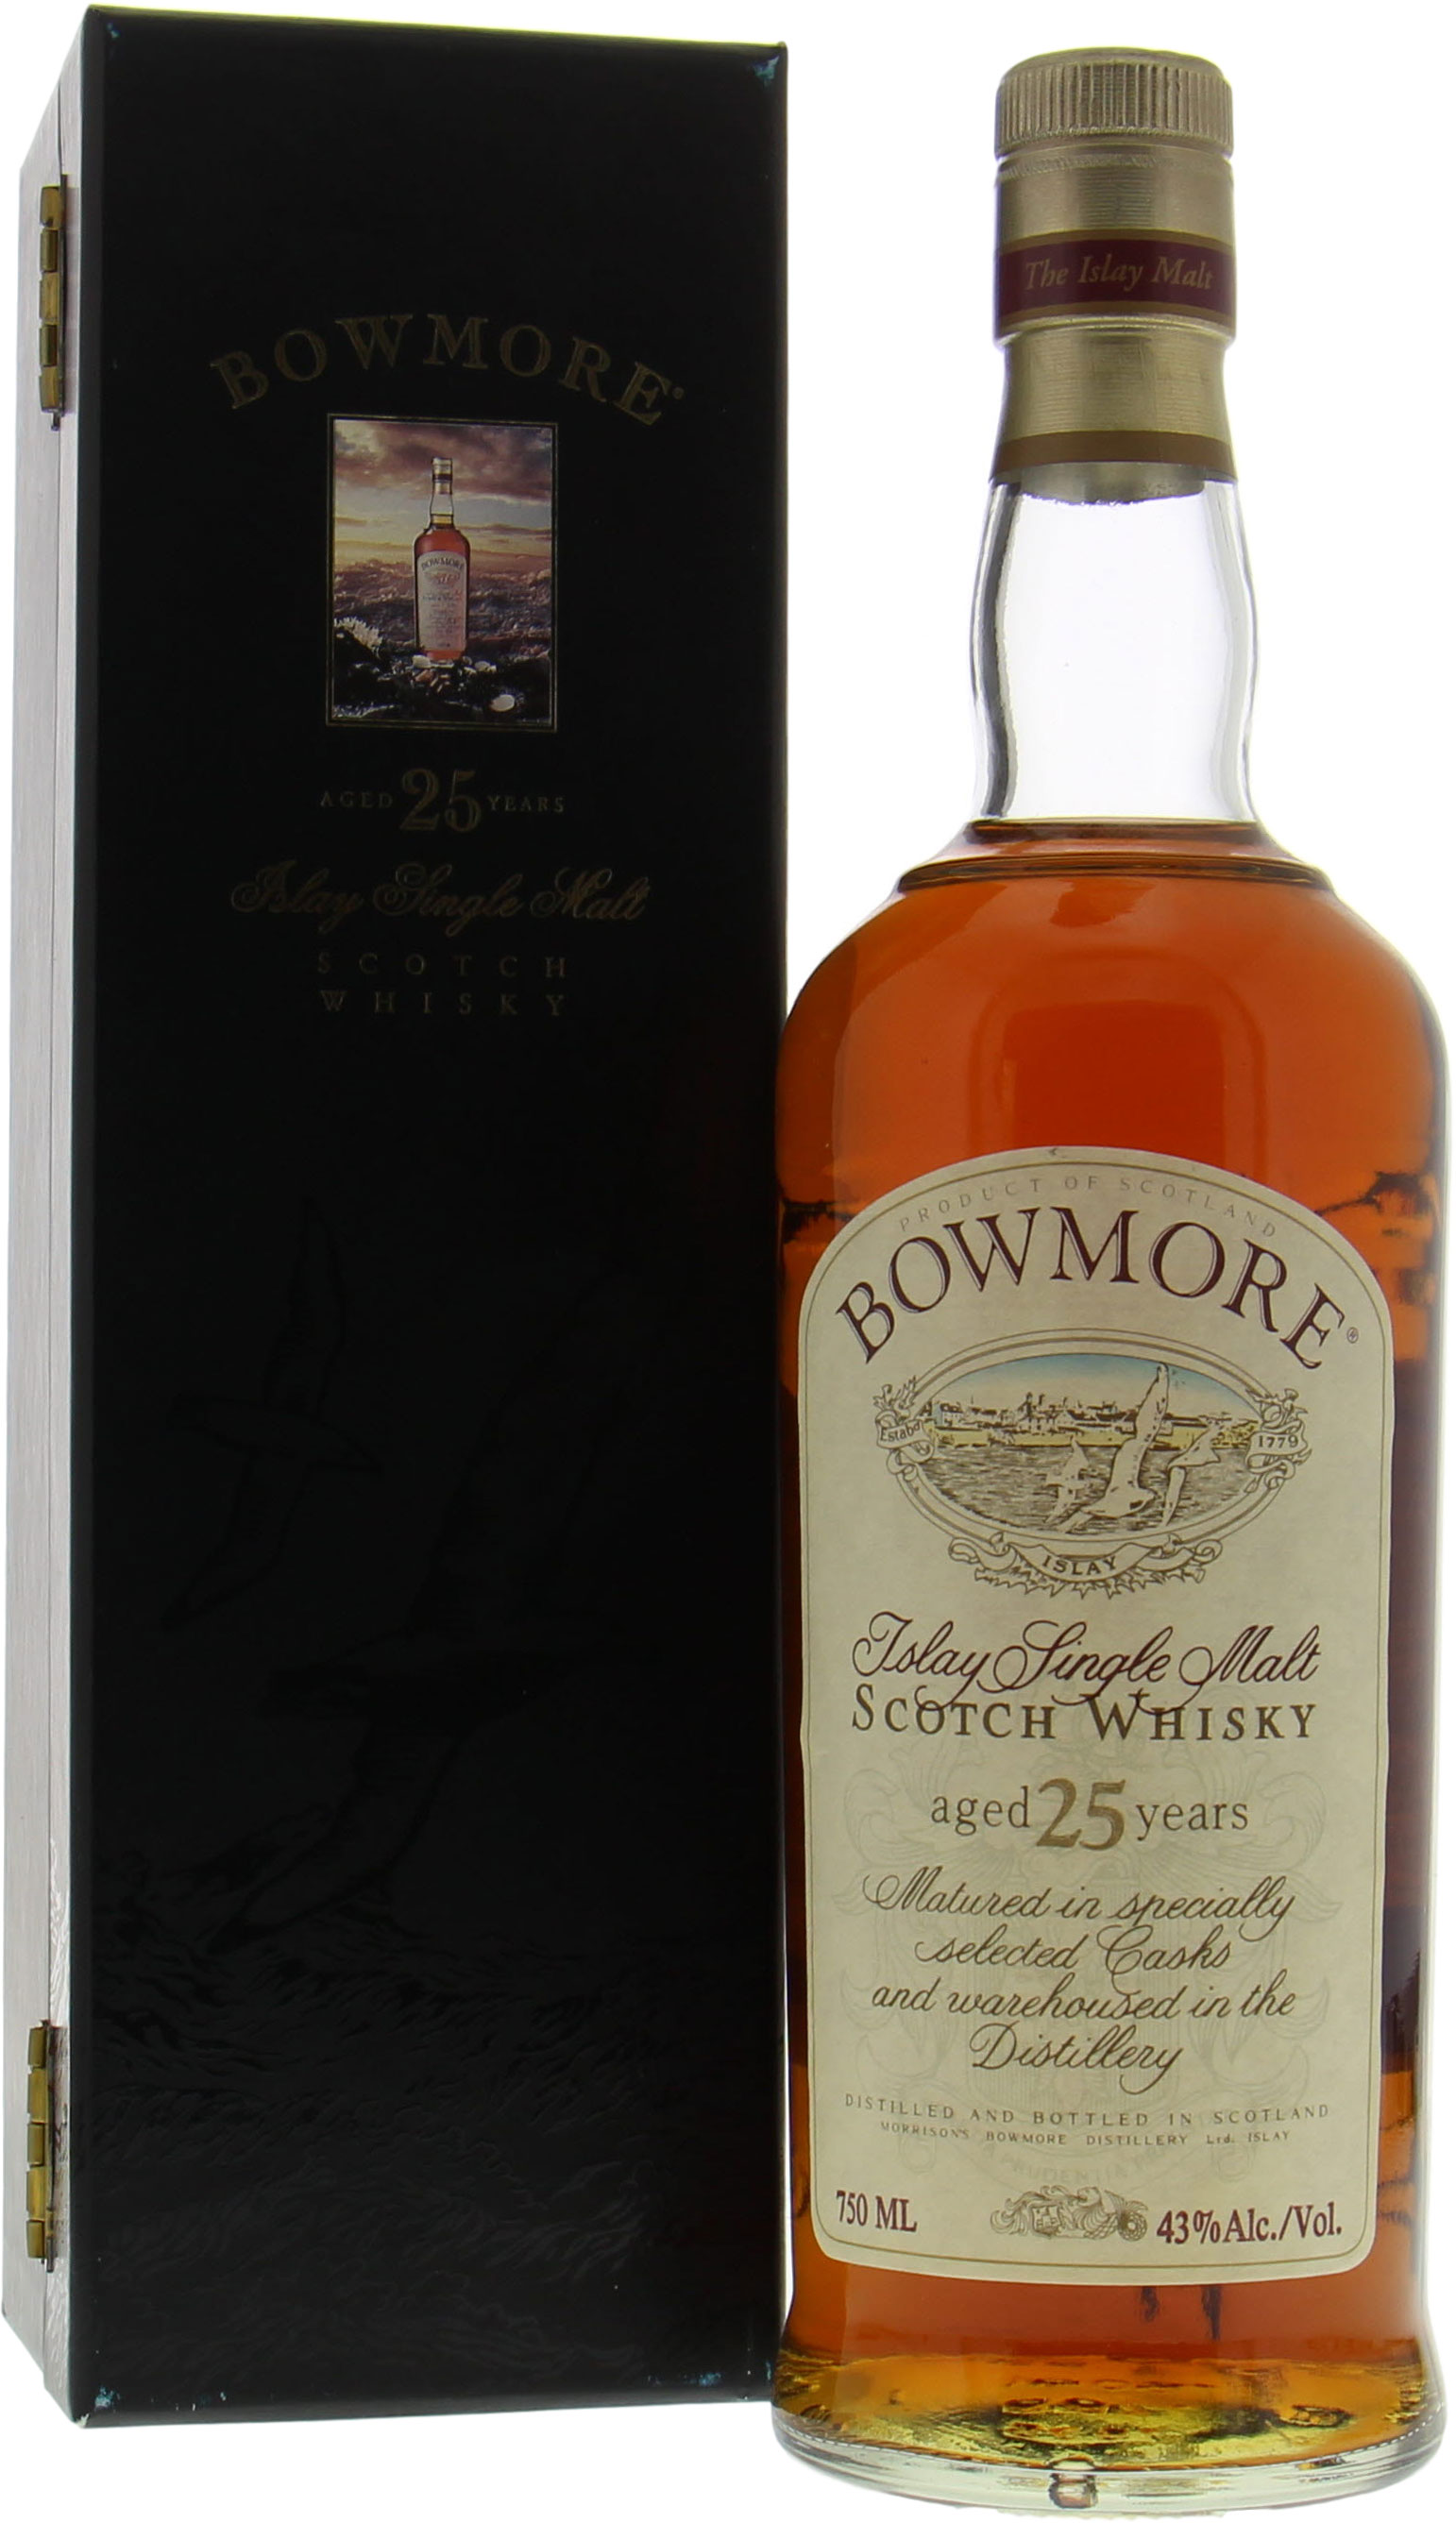 Bowmore - 25 years Old Seagulls Old label 43% NV In Original Container